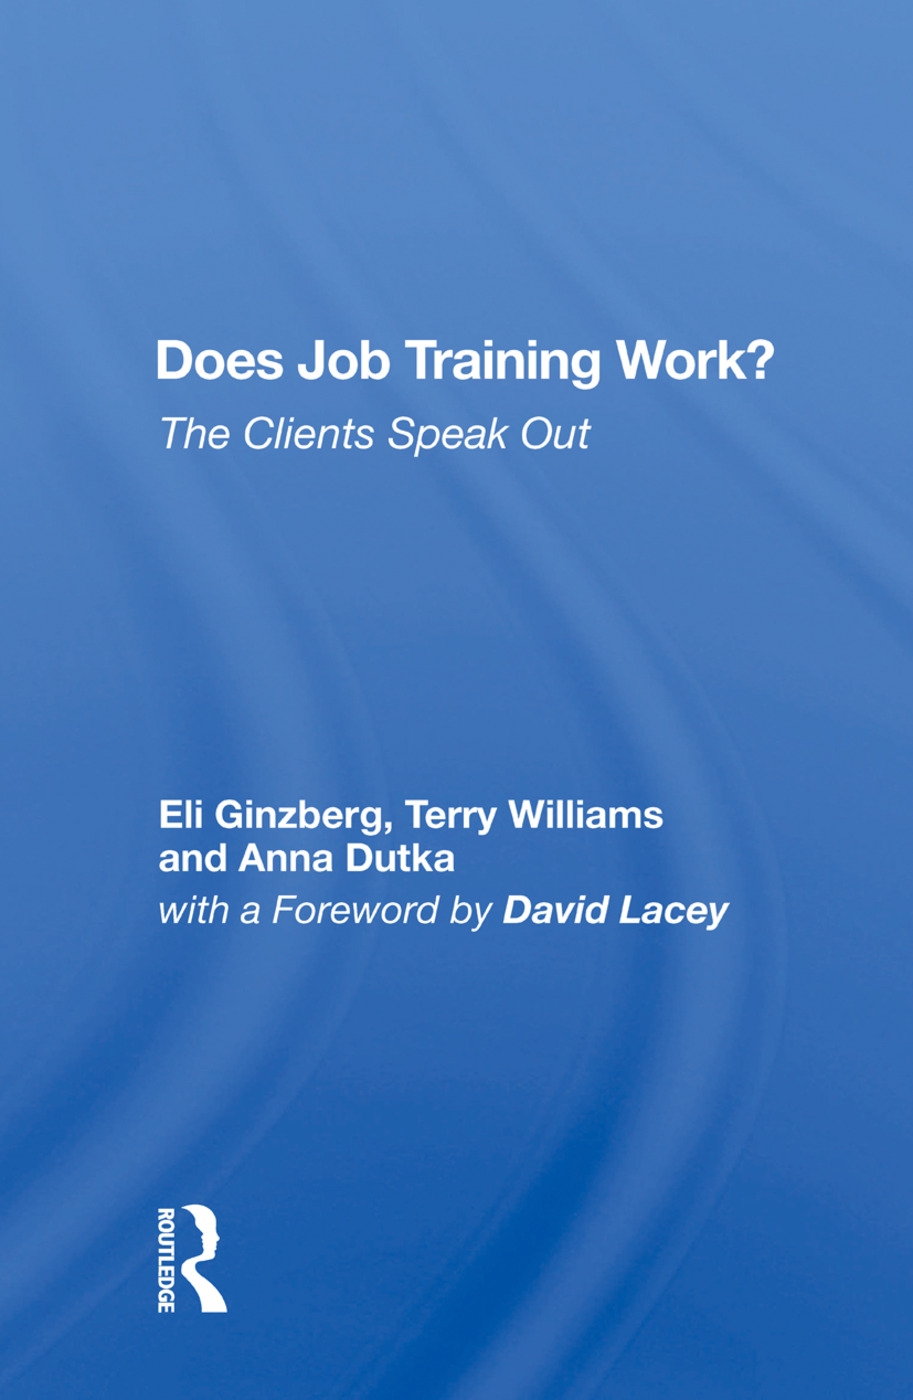 Does Job Training Work?: The Clients Speak Out